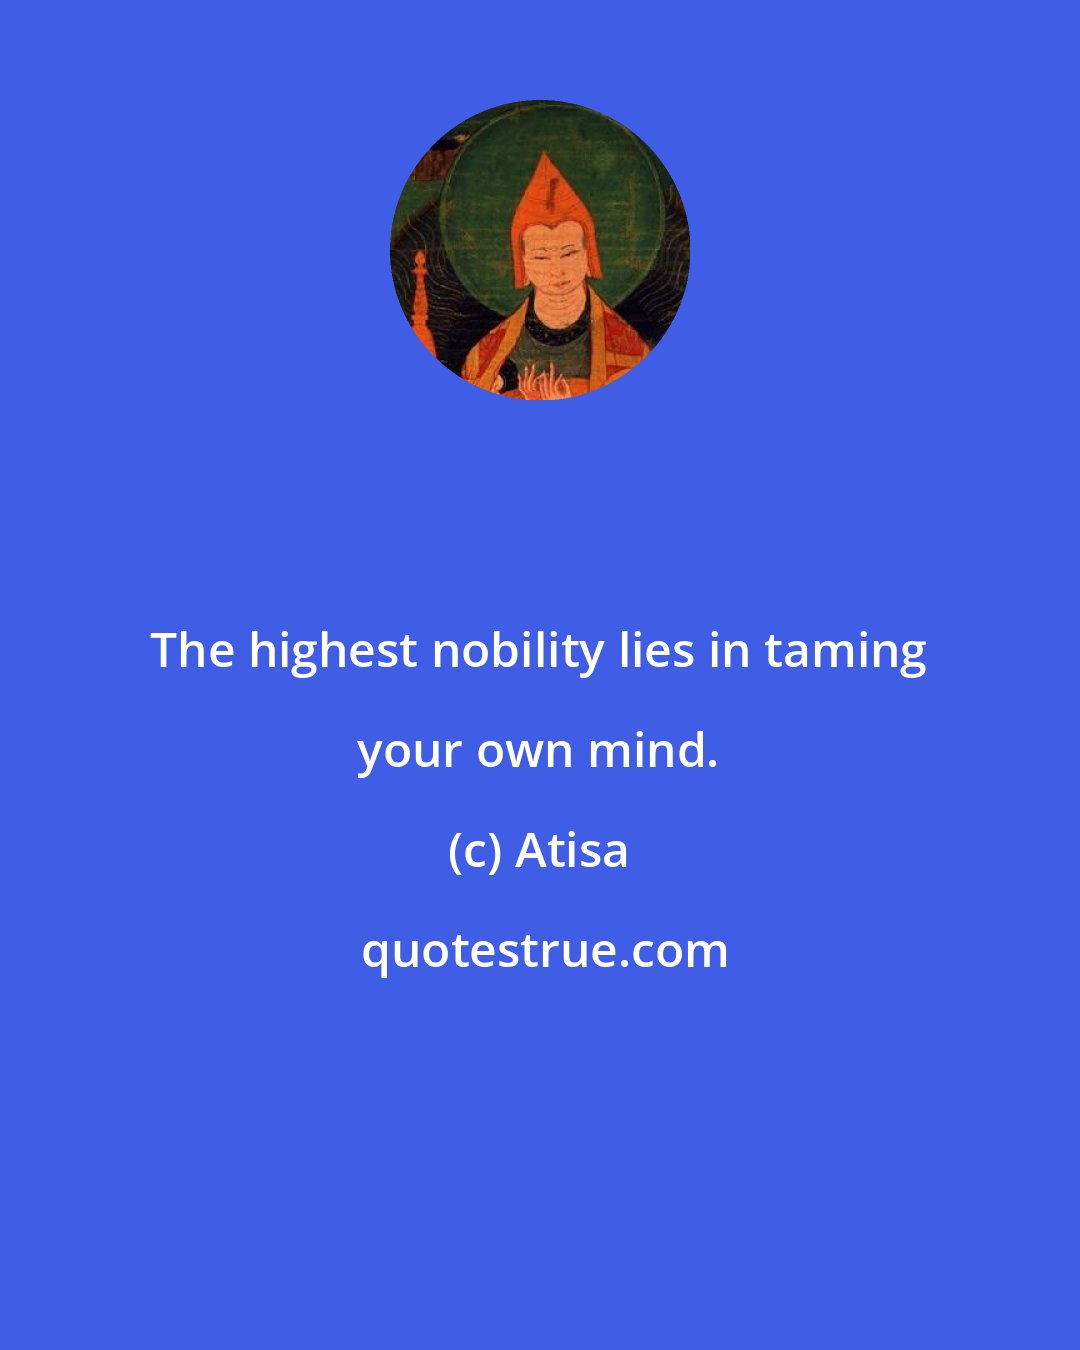 Atisa: The highest nobility lies in taming your own mind.